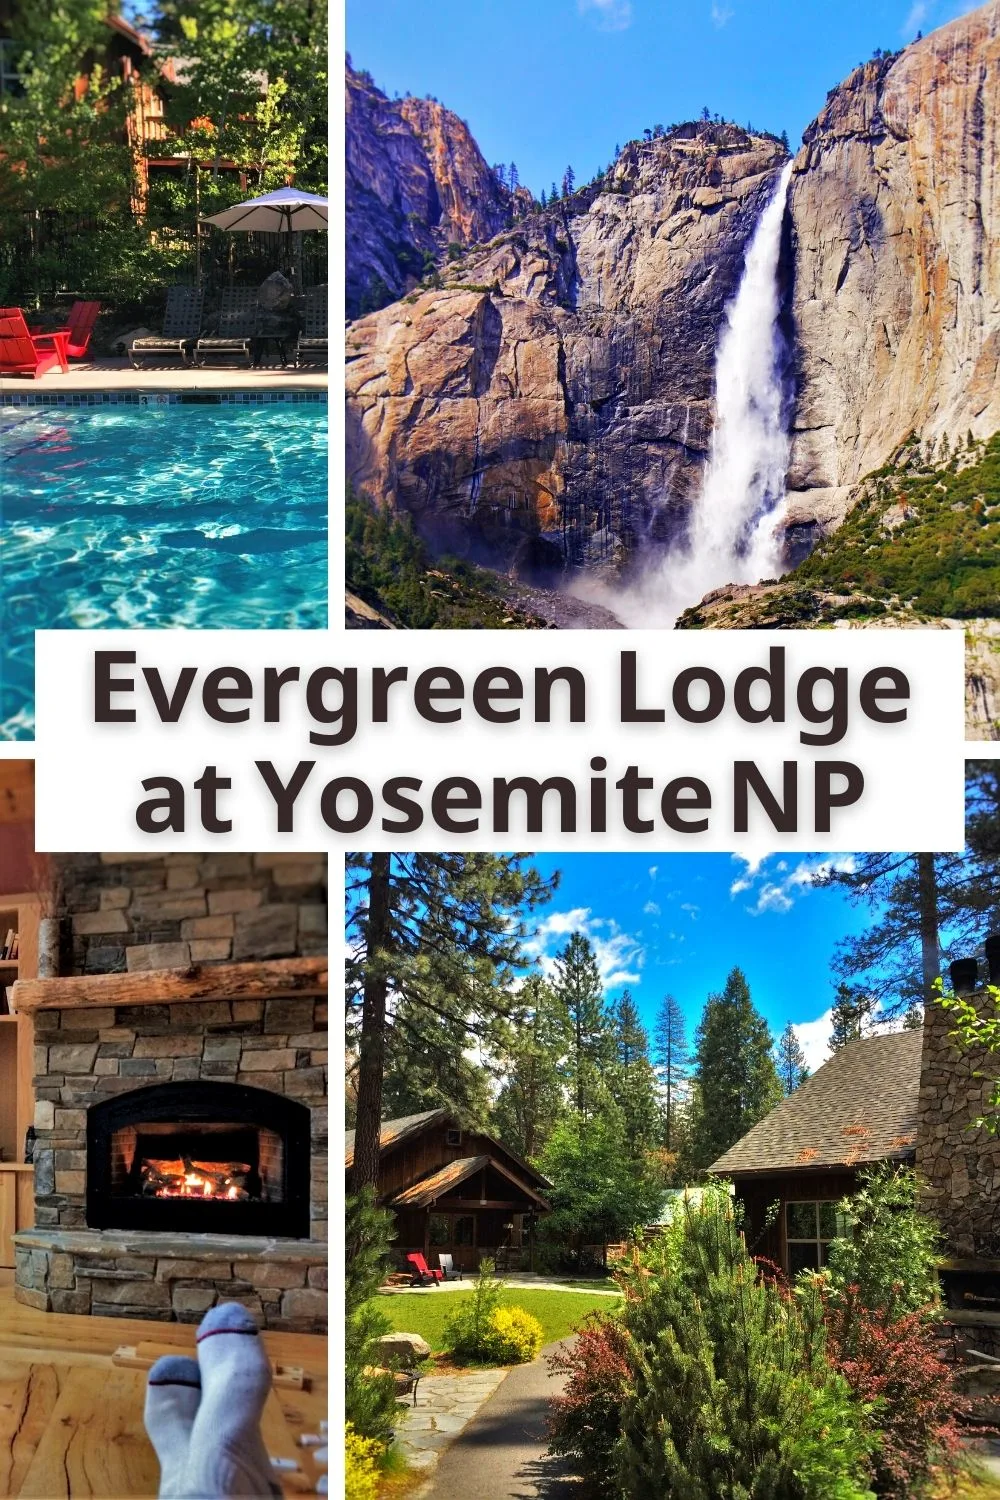 The Evergreen Lodge at Yosemite is ideal for exploring the quiet side of Yosemite National Park. From family cabins to rustic retreat lodging, the Evergreen Lodge has many options and is located very near Hetch Hetchy and Groveland, California.